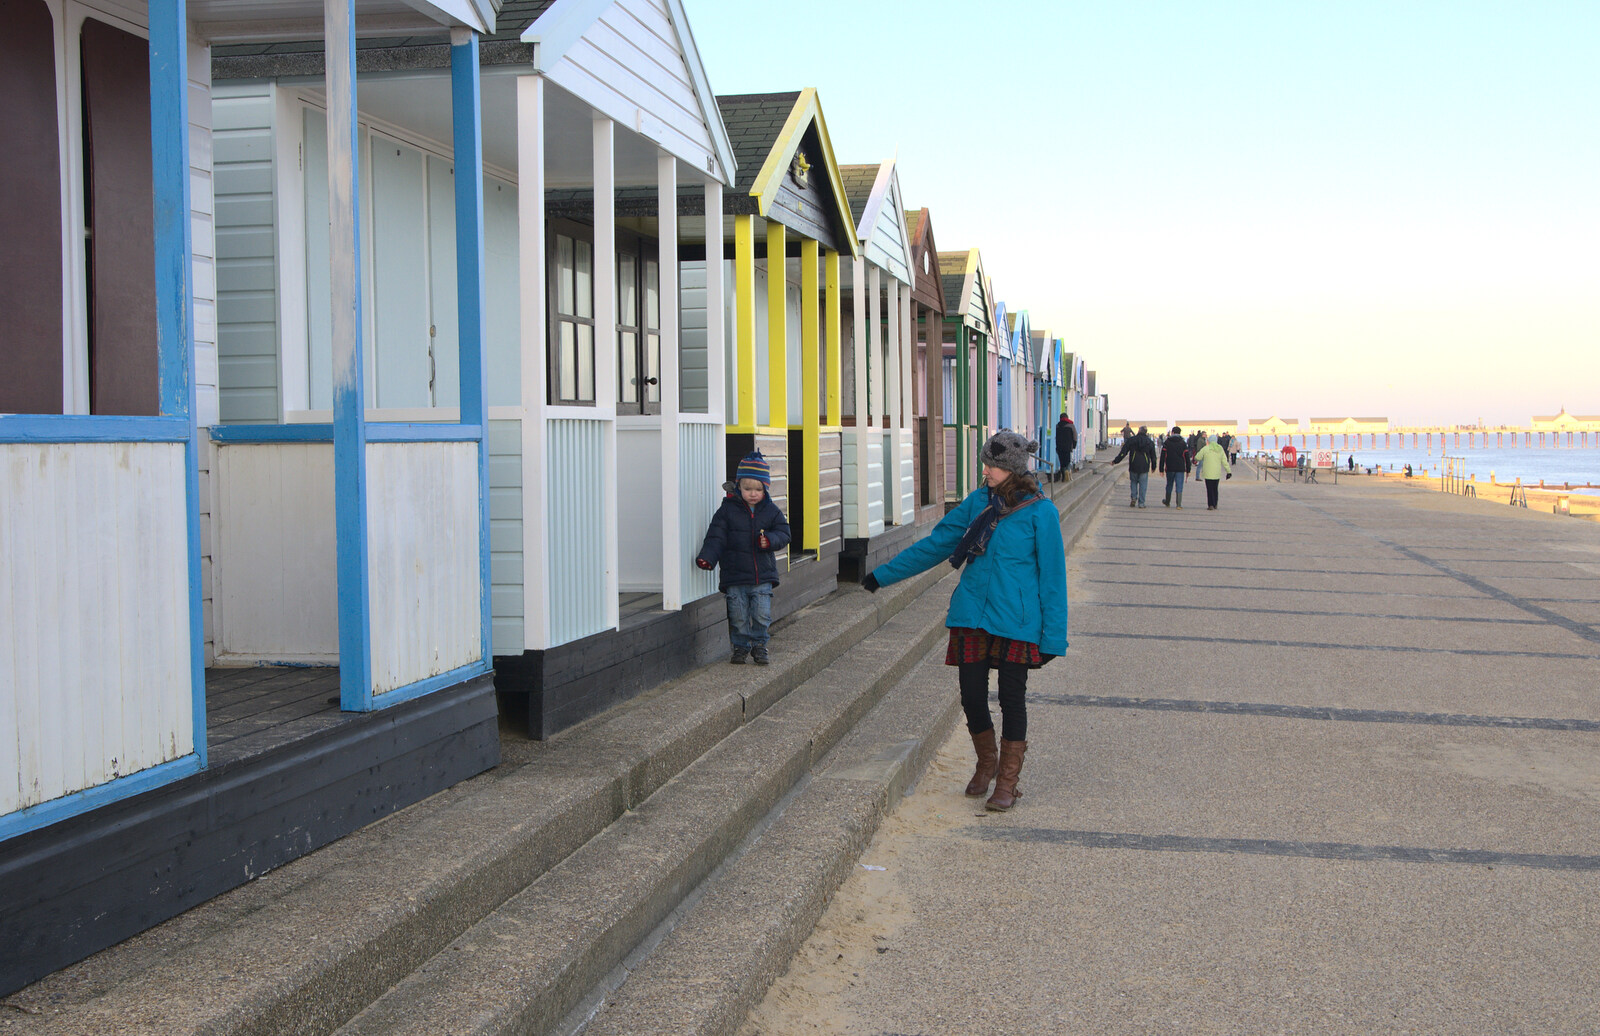 Harry walks along by the beach huts from Sunset on the Beach, Southwold, Suffolk - 30th December 2014